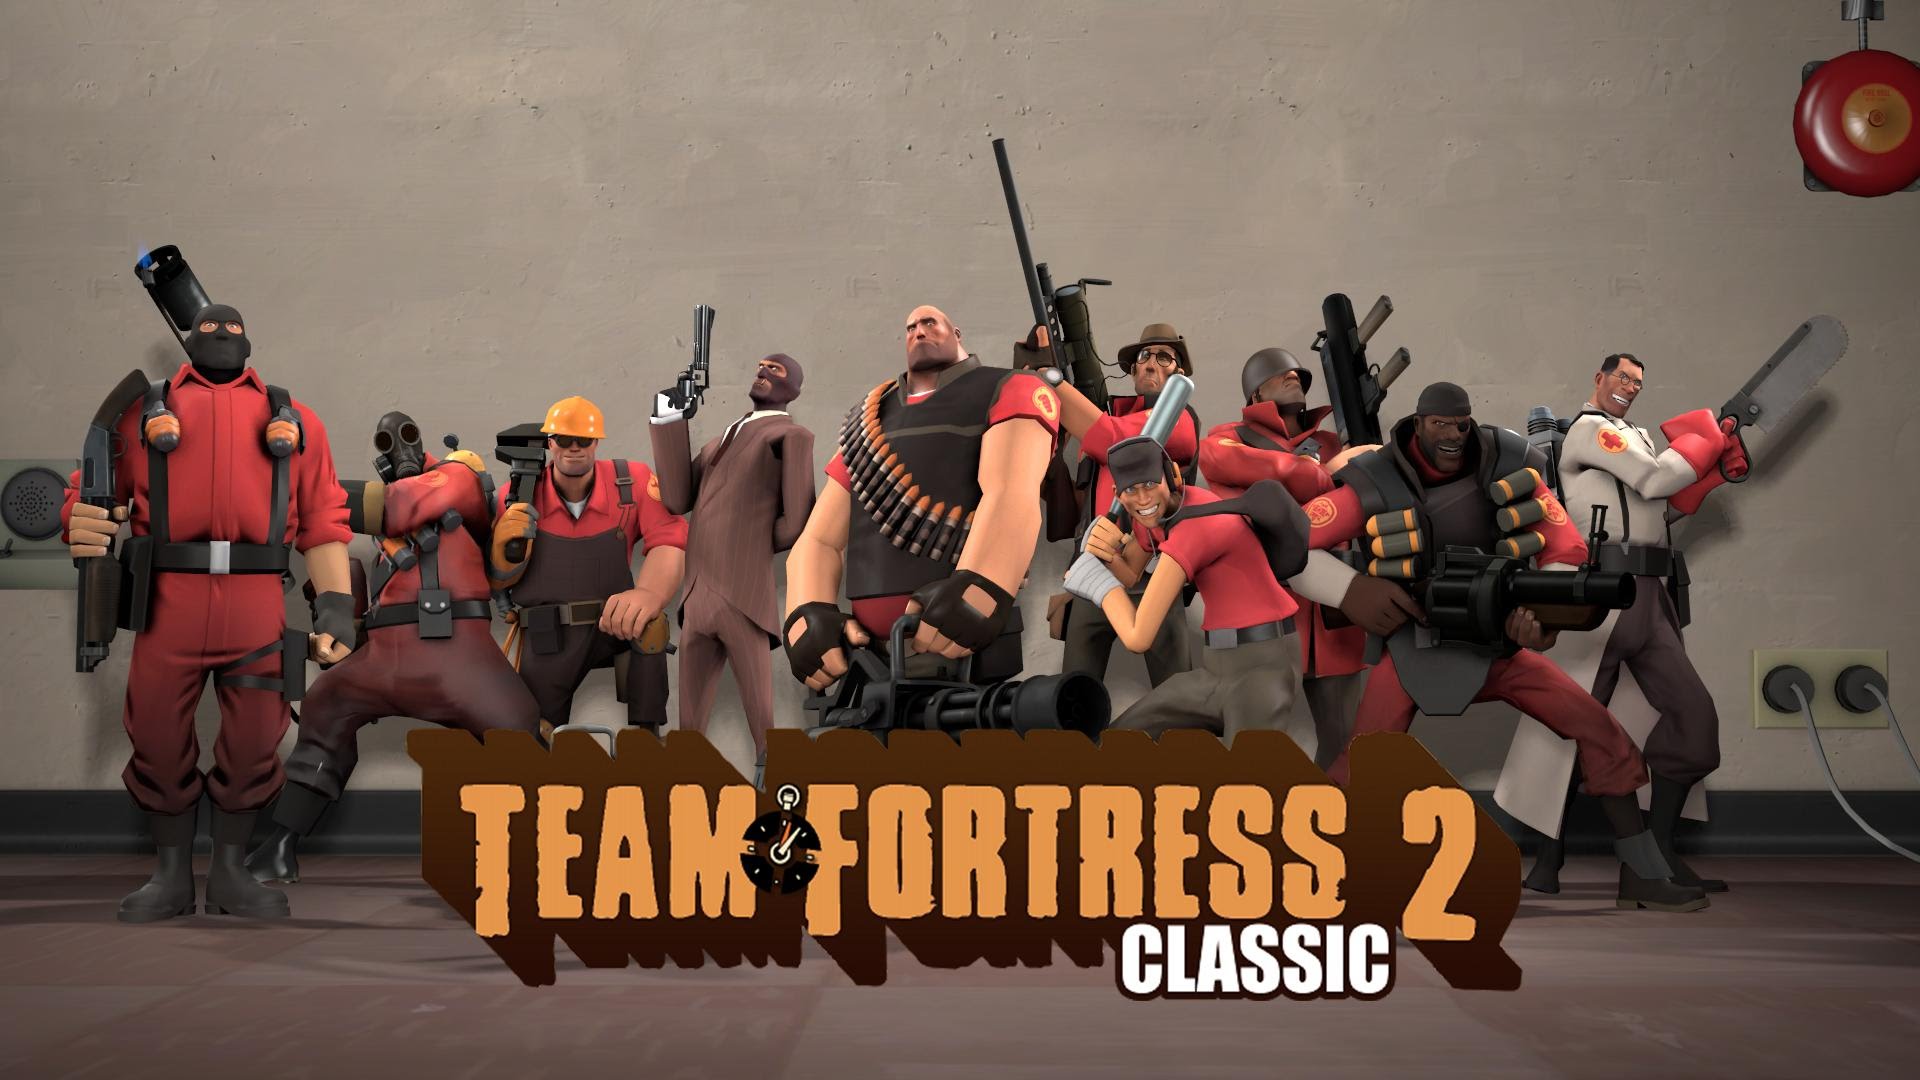 The steam team fortress 2 фото 22